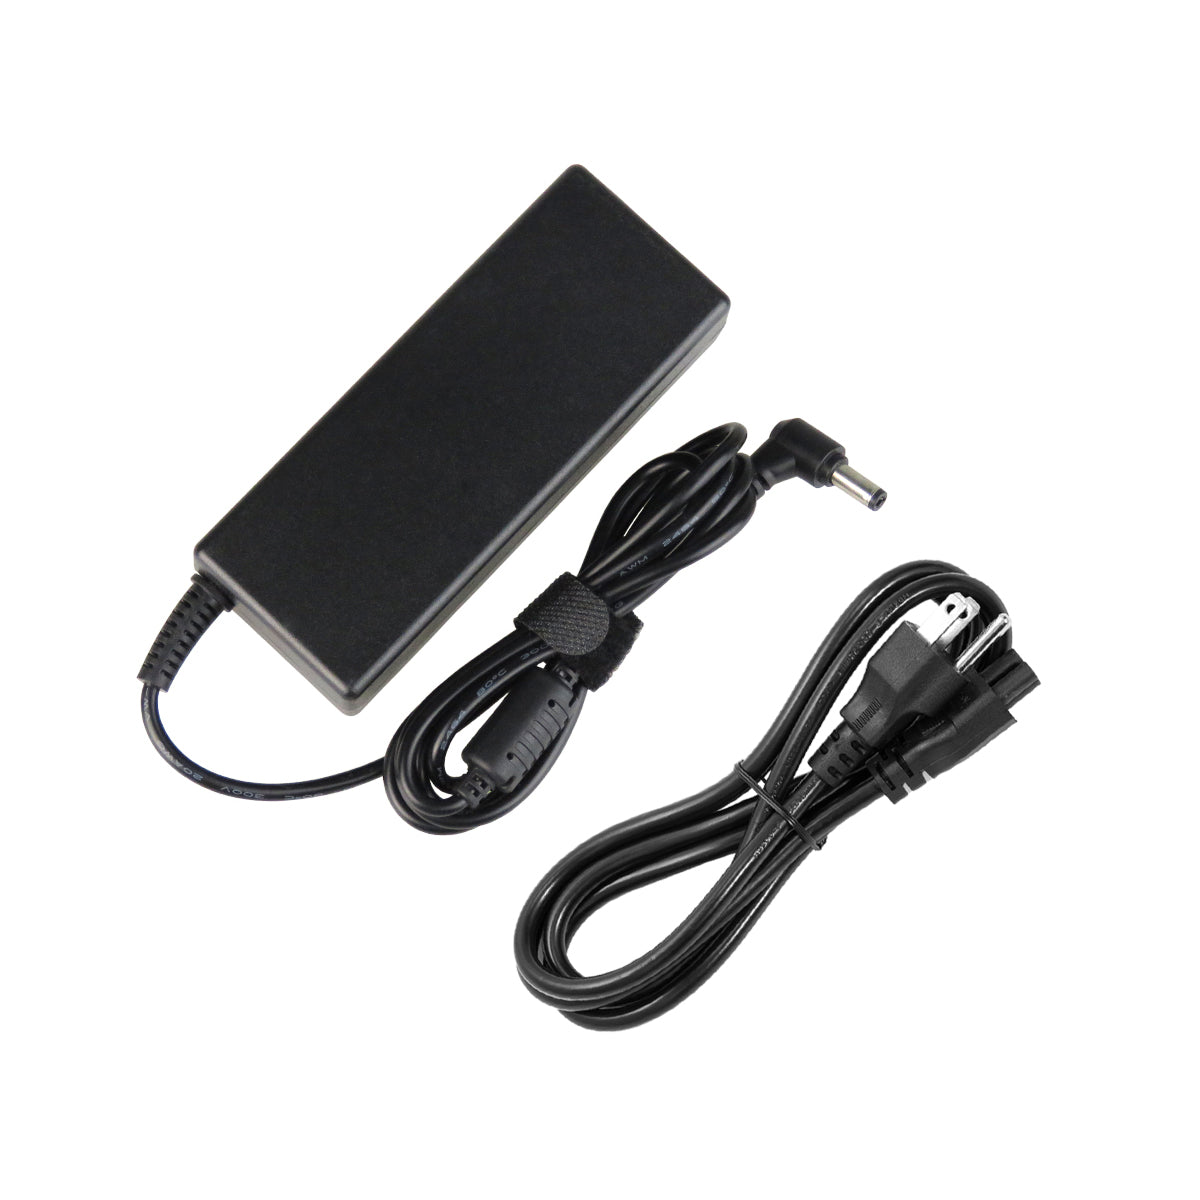 AC Adapter Charger for Lenovo IdeaPad Y400 Notebook.